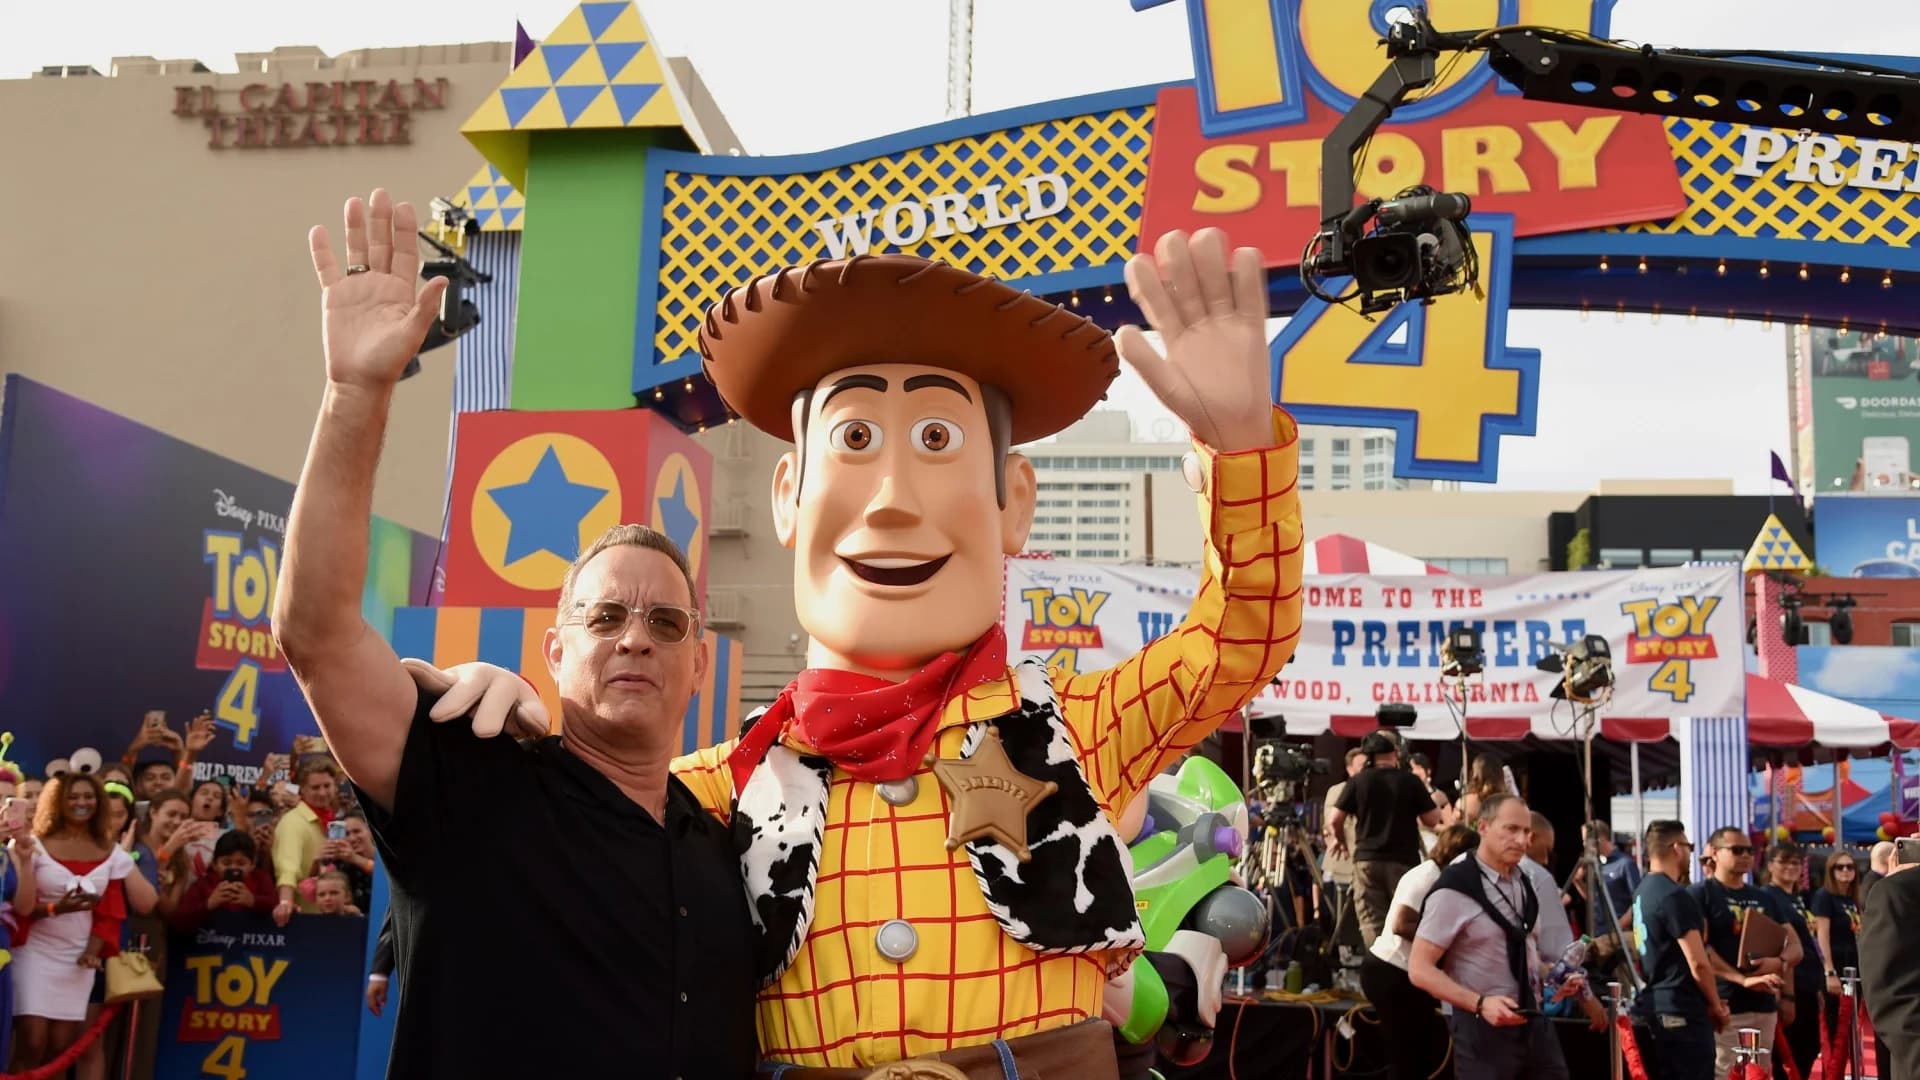 Celebrities at the 'Toy Story 4' premiere